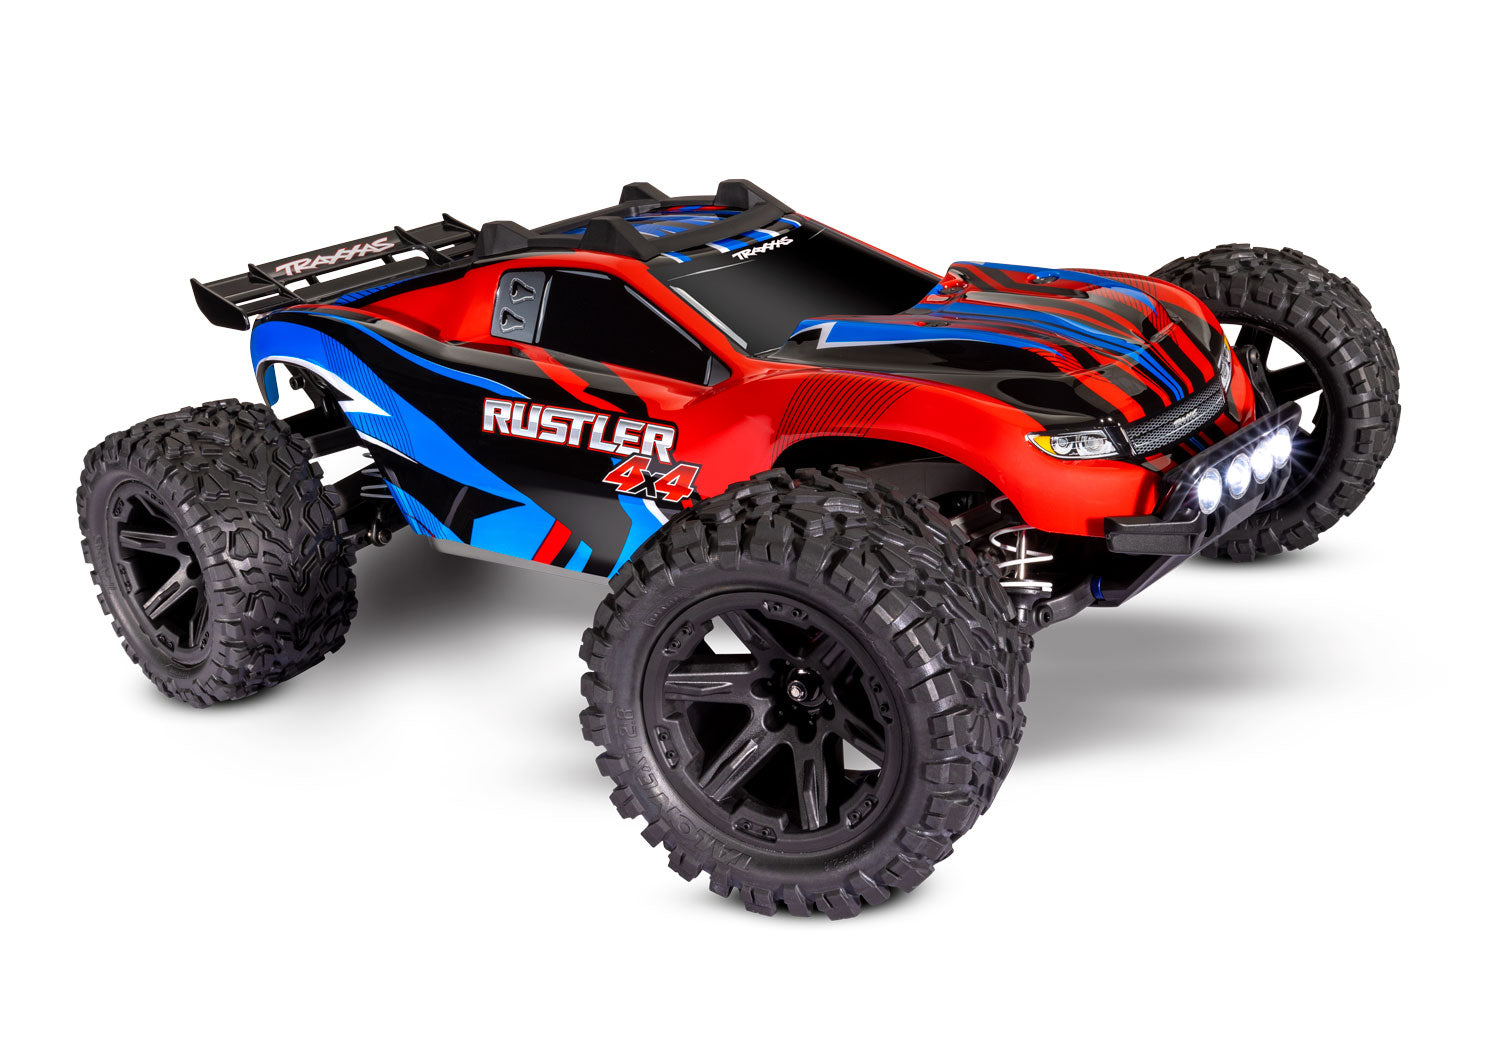 Bandit®: 1/10 Scale Off-Road Buggy with TQ™ 2.4GHz radio system